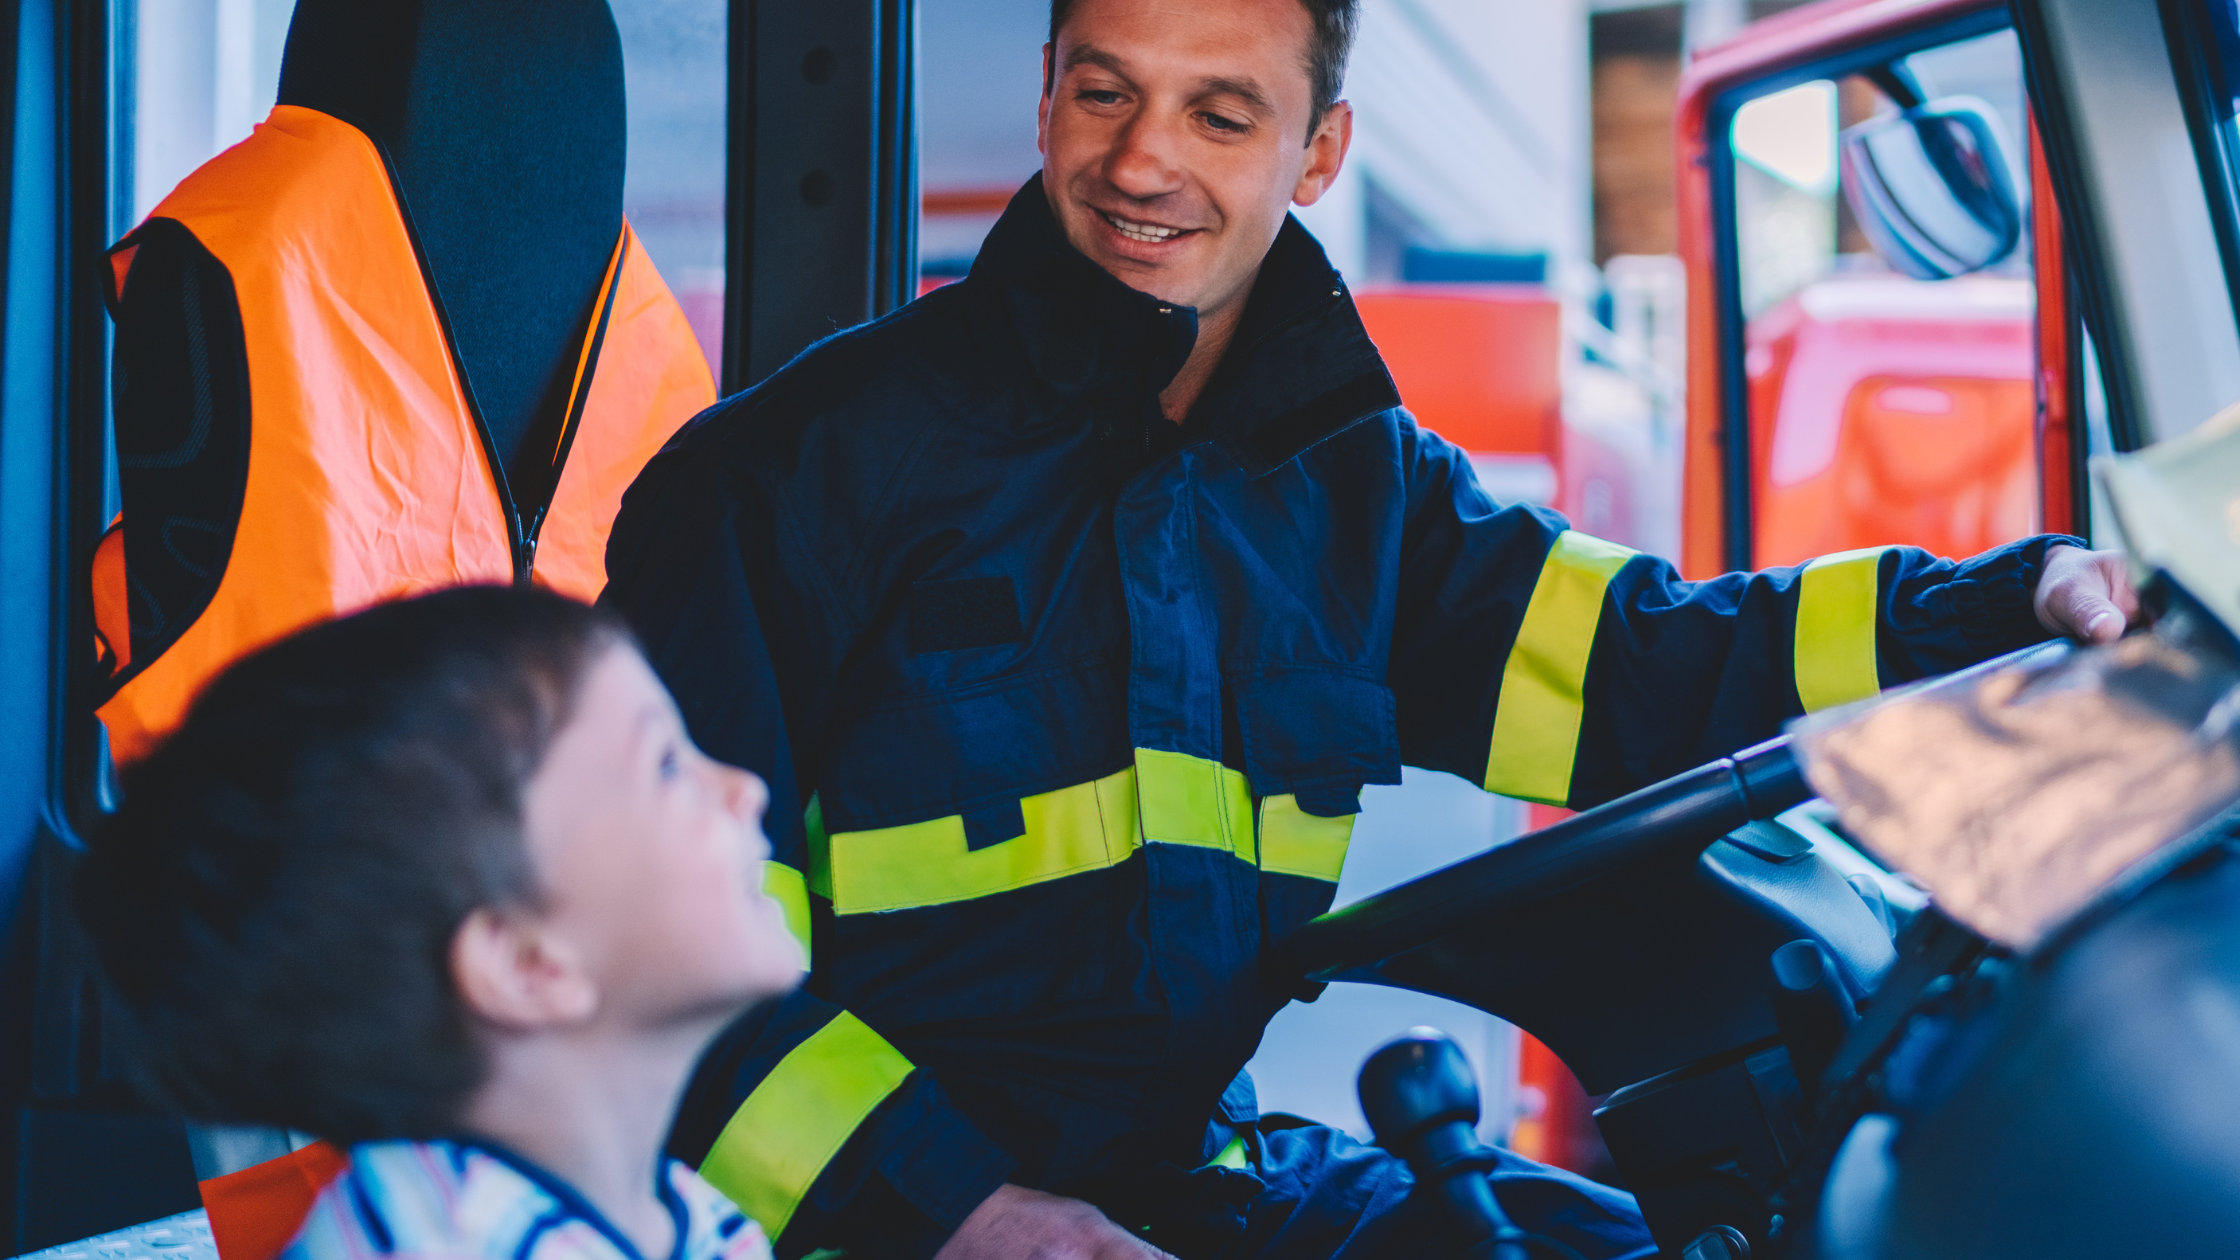 Providing Meaningful Support to Your Firefighters + Their Families